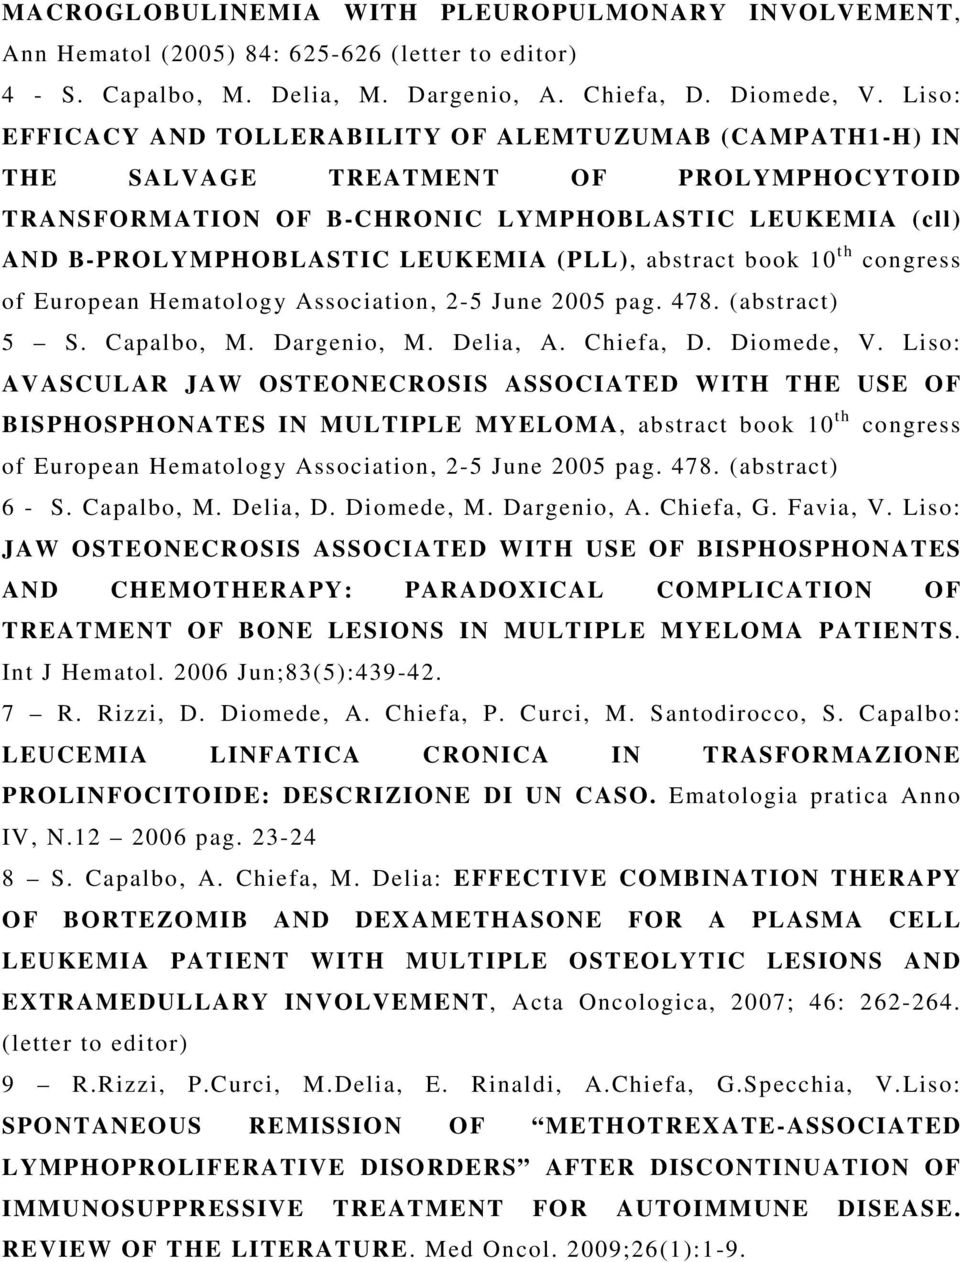 (PLL), abstract book 10 th congress of European Hematology Association, 2-5 June 2005 pag. 478. (abstract) 5 S. Capalbo, M. Dargenio, M. Delia, A. Chiefa, D. Diomede, V.